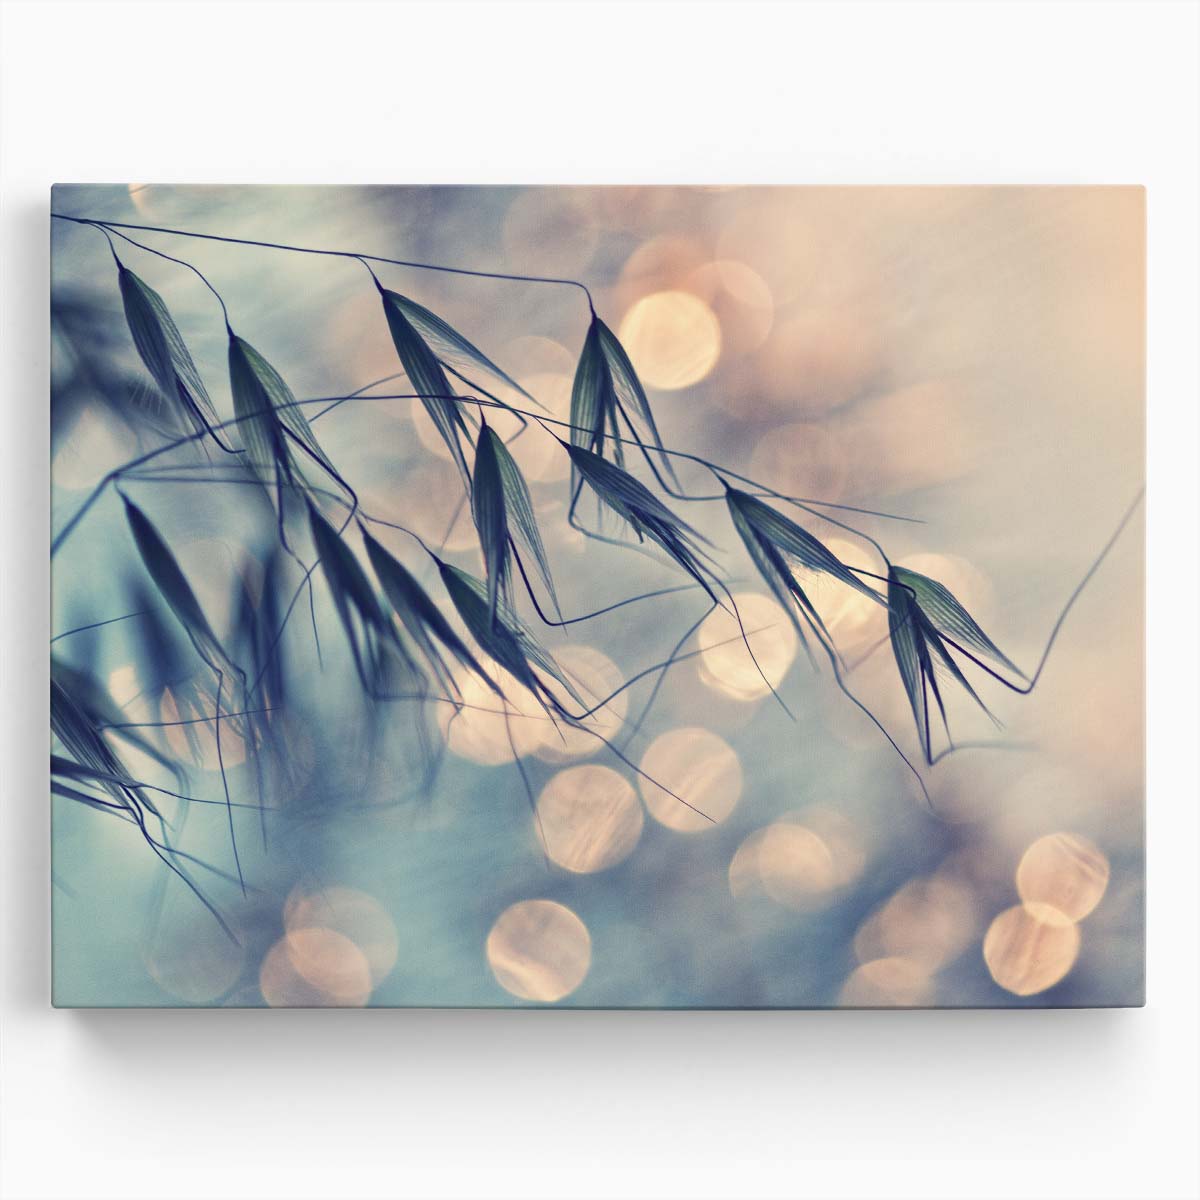 Serene Macro Grass & Reed Landscape - Pastel Photography Wall Art by Luxuriance Designs. Made in USA.